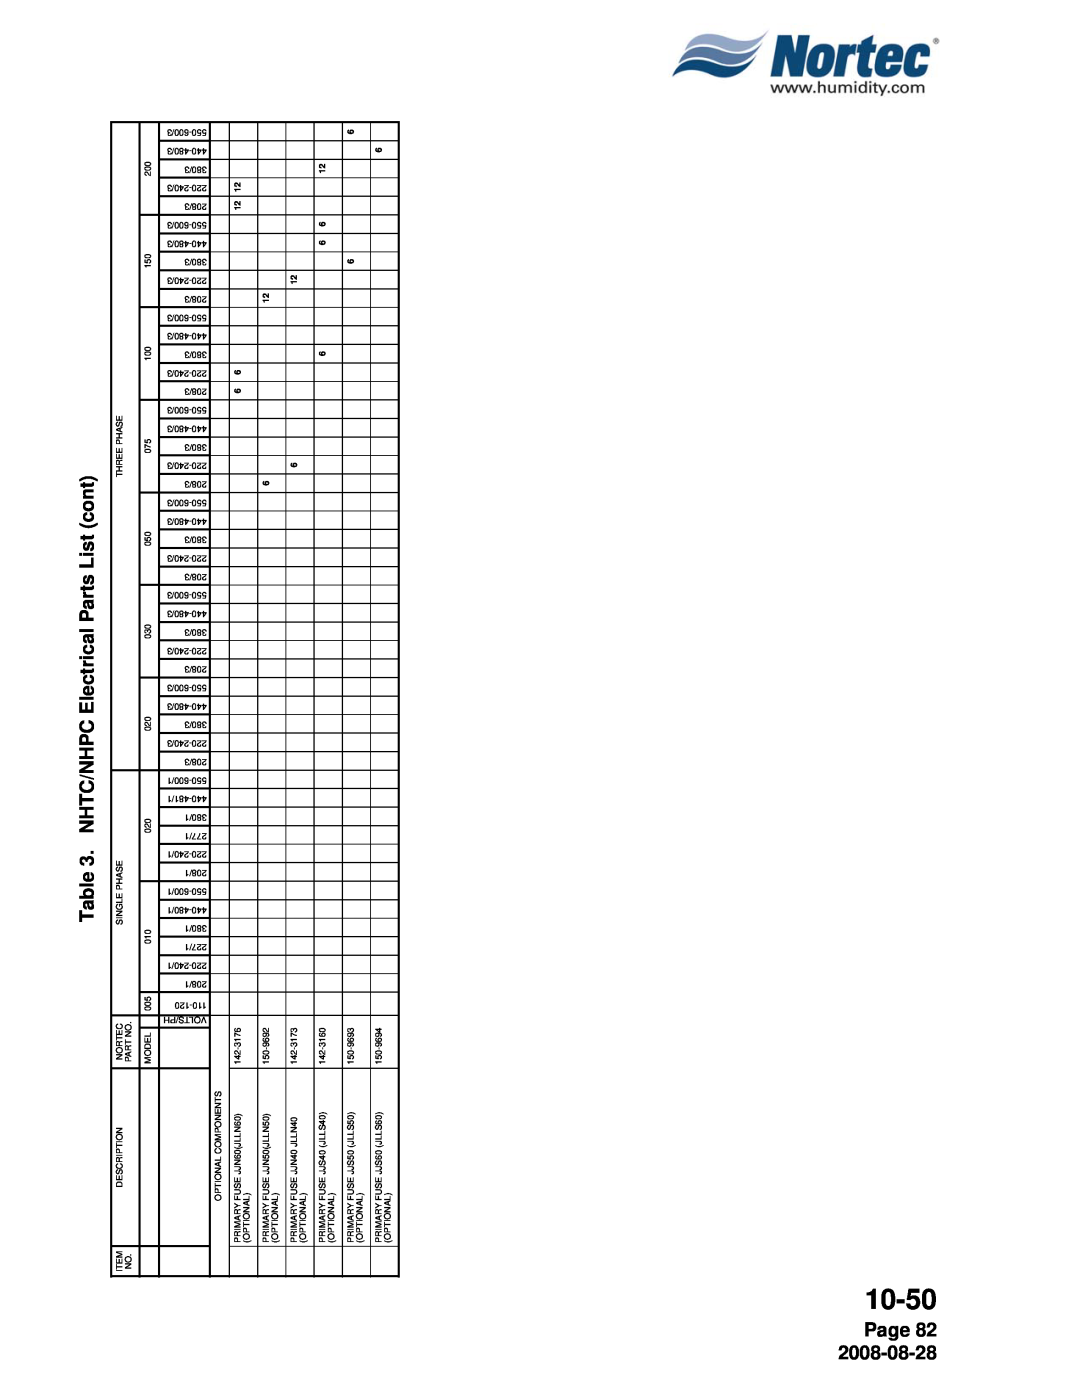 Nortec NH Series installation manual NHTC/NHPC Electrical Parts List cont, Page 82, 10-50 